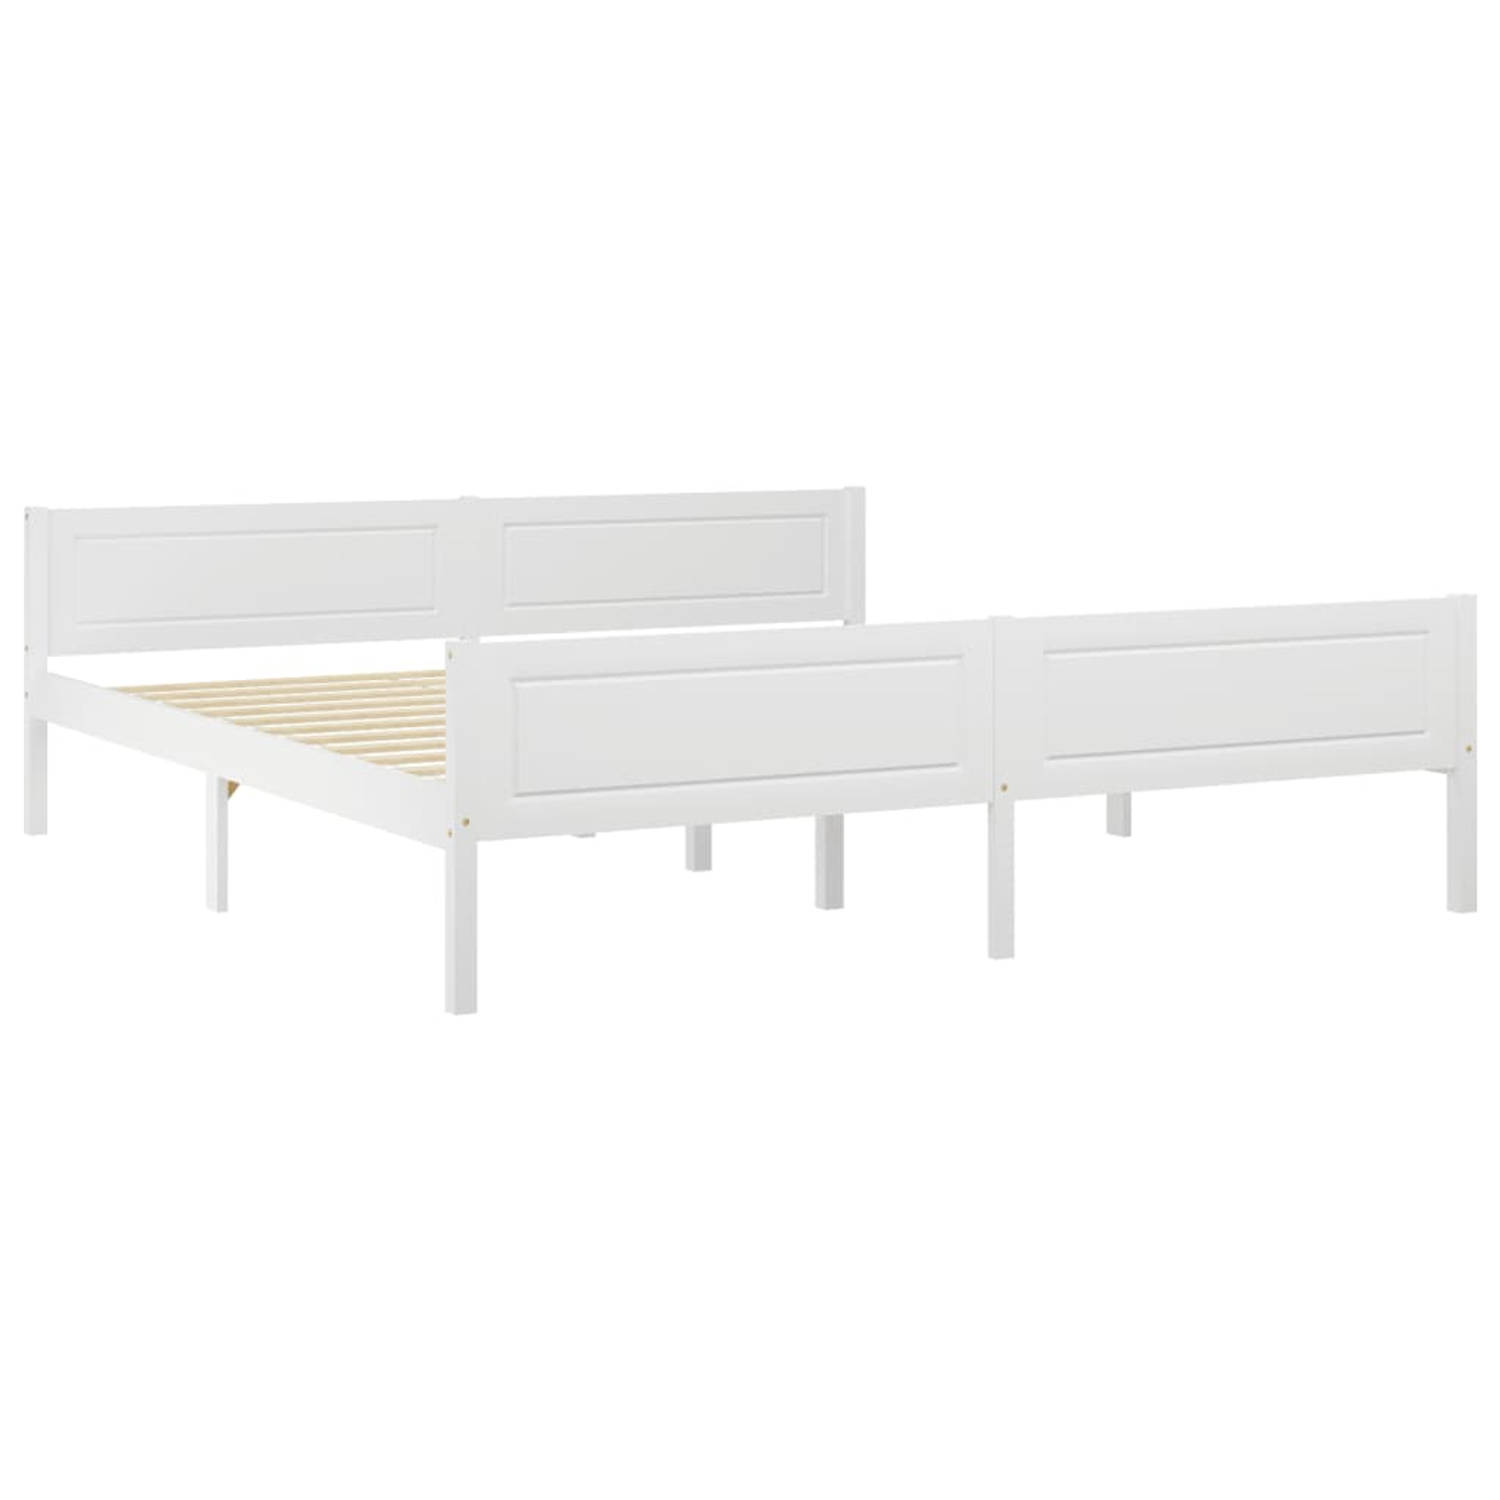 The Living Store Bedframe massief grenenhout wit 180x200 cm - Bedframe - Bedframe - Bed Frame - Bed Frames - Bed - Bedden - 2-persoonsbed - 2-persoonsbedden - Tweepersoons Bed